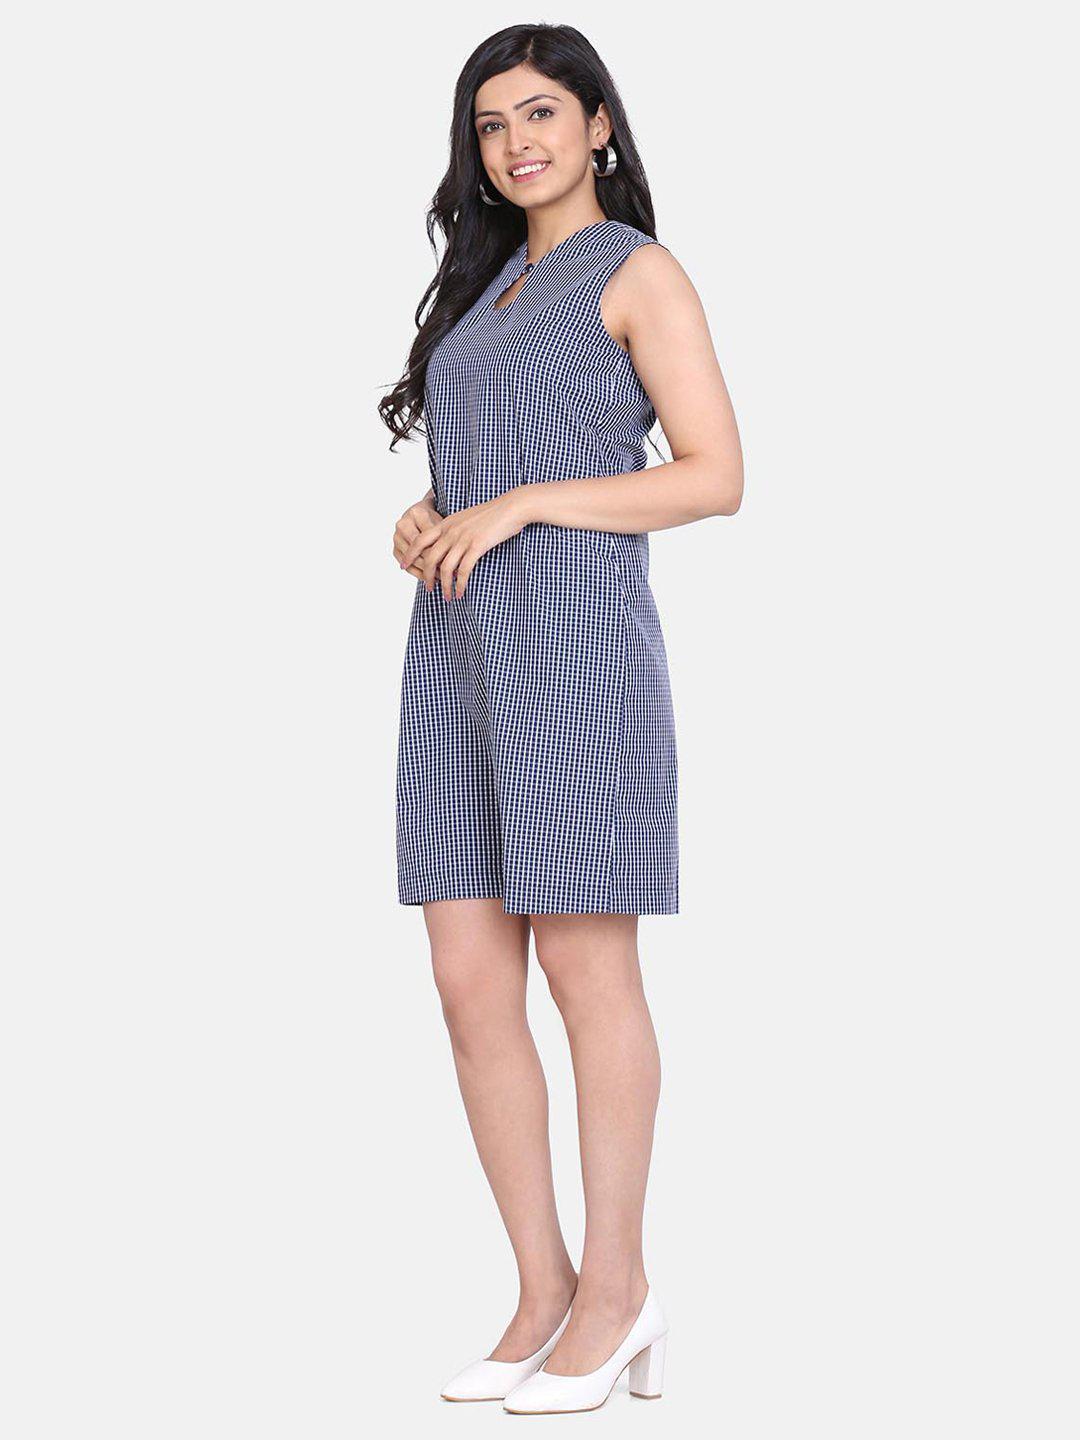 Gingham Check Cotton Shift Dress For Women - Blue and White